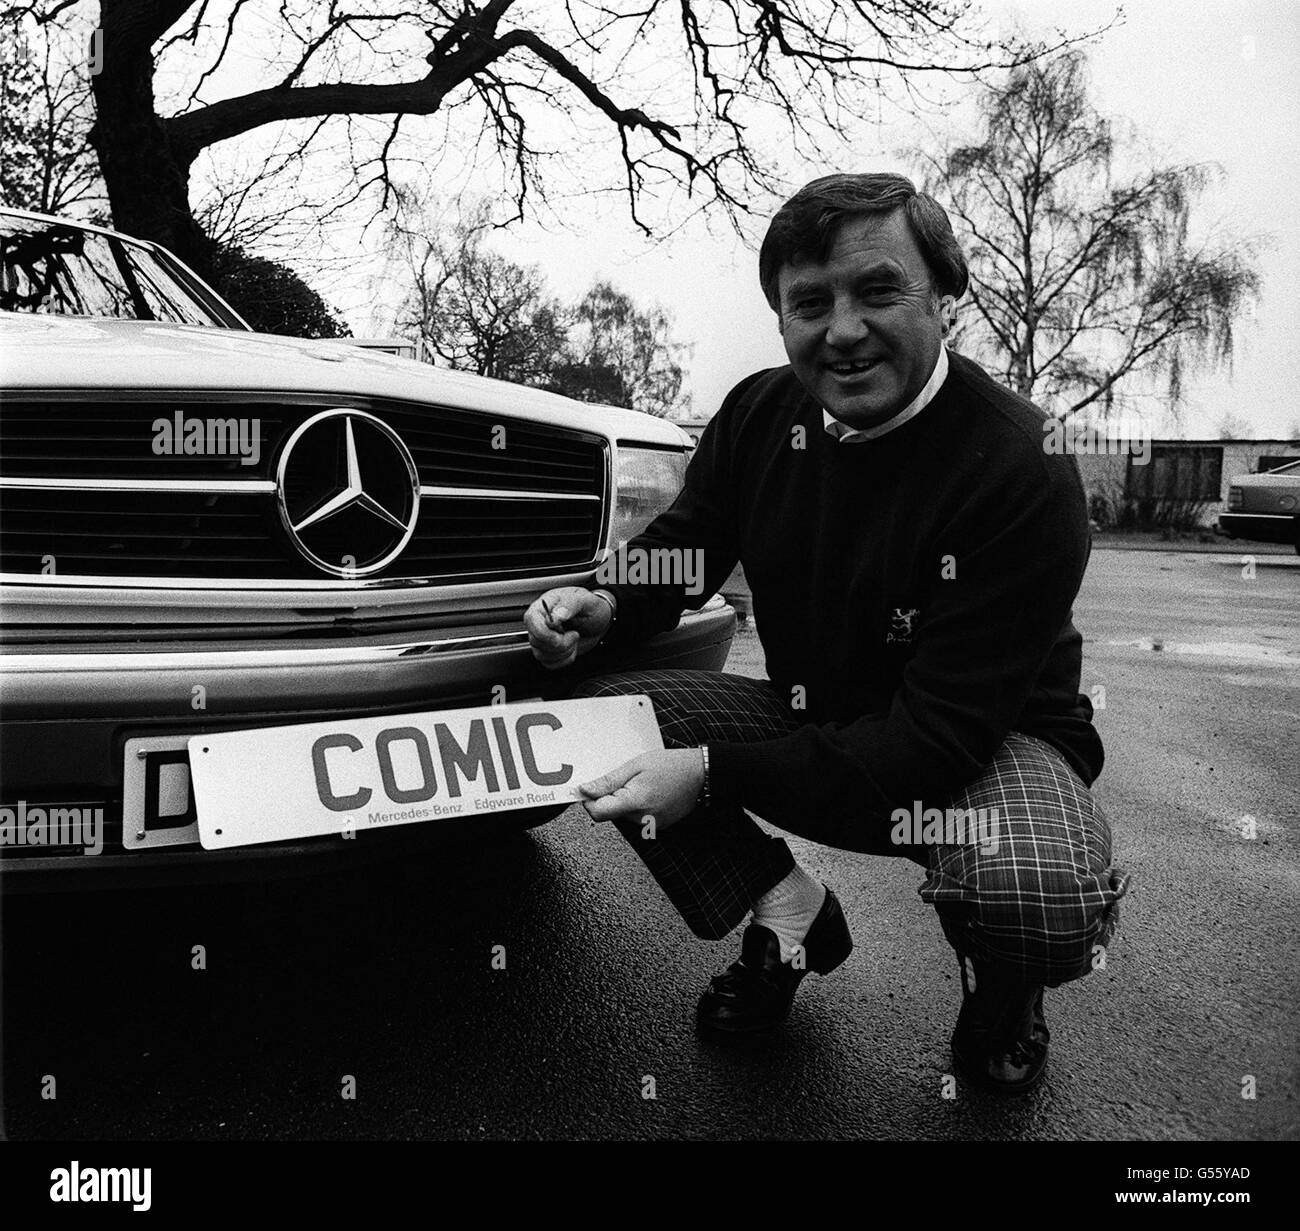 Comedian Jimmy Tarbuck. The comedian Jimmy Tarbuck with his famous number plate 'comic' which he is putting on his new Mercedes-Benz. Stock Photo